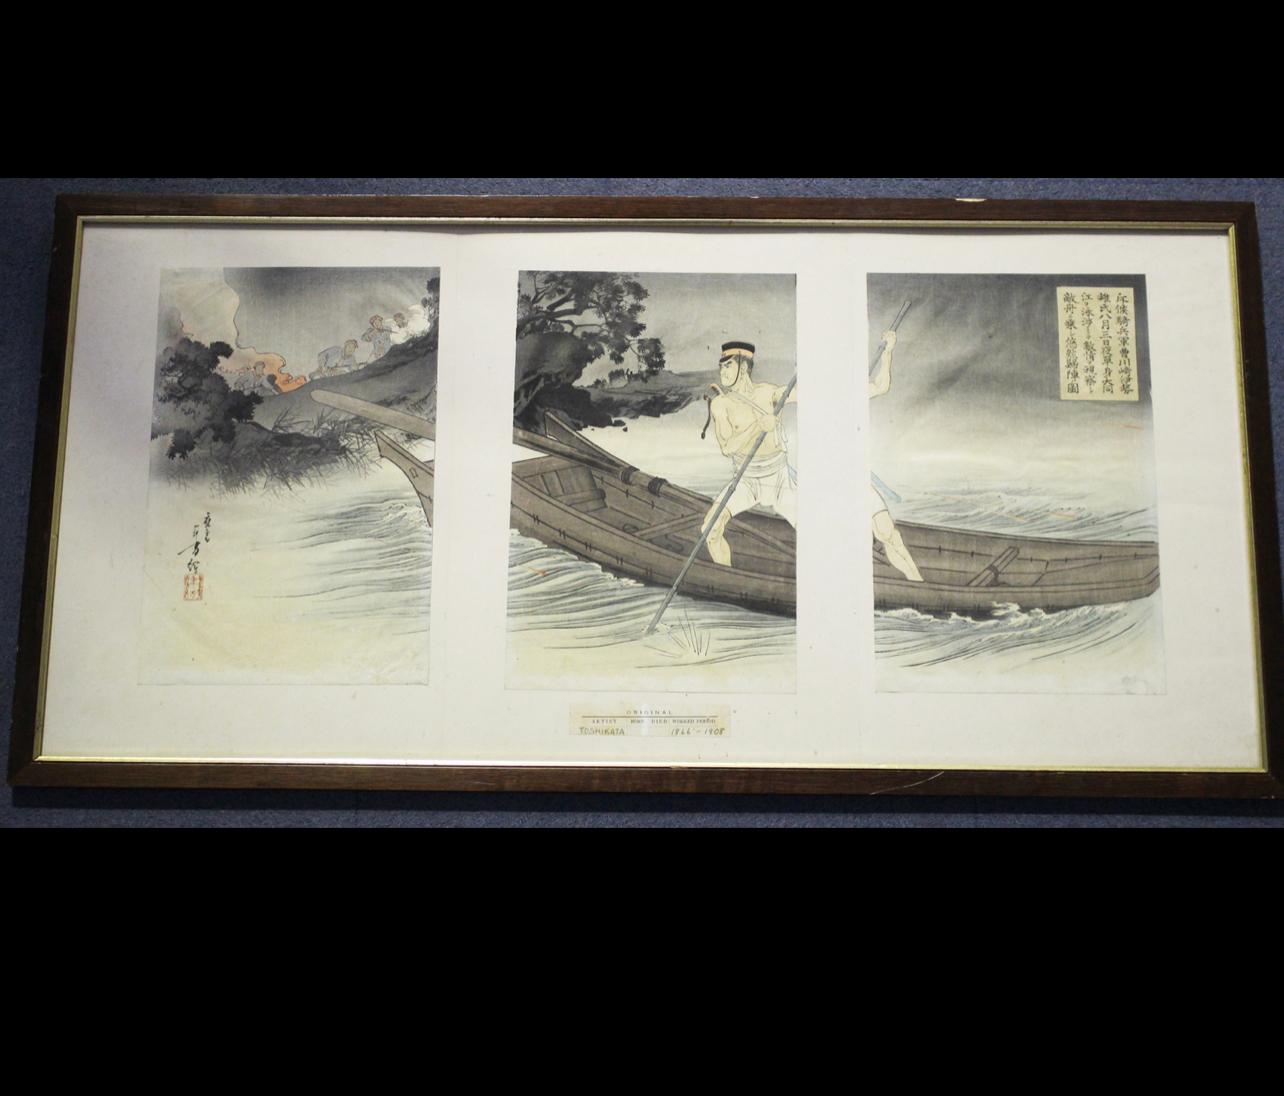 
Muzuno Toshikata (1866-1908) - a Japanese polychrome oban triptych woodblock print, circa 1894, depicting sergeant Kawasaki Iseo escaping from a Chinese encampment during the Sino-Japanese War, 36cm x 70.5cm, framed and glazed.
